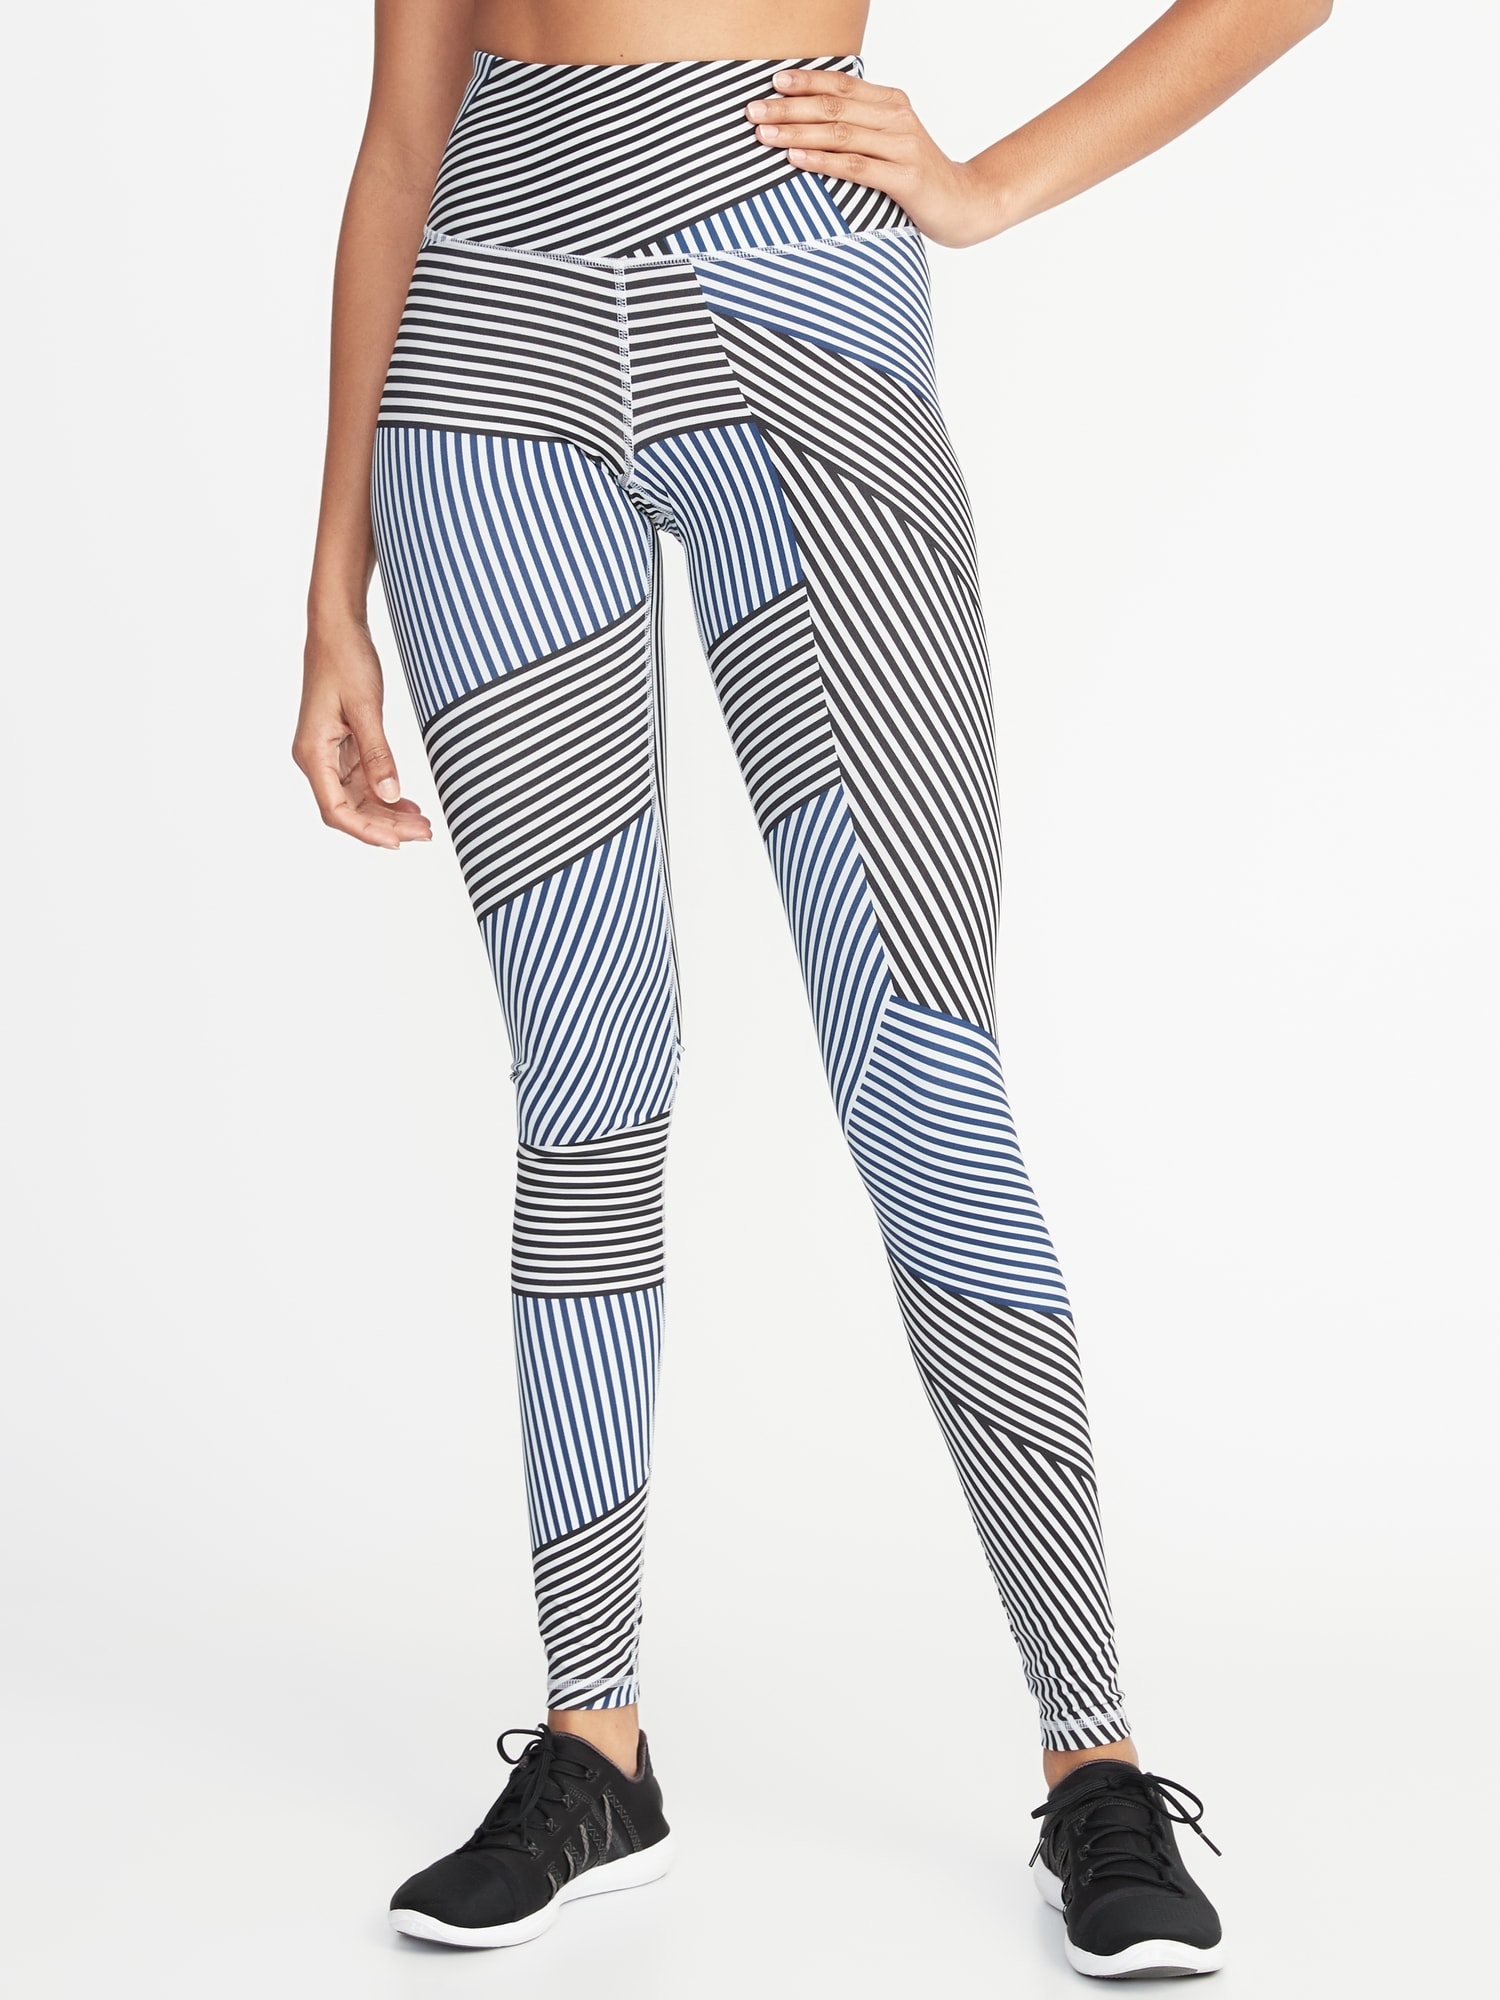 High-Waisted Elevate Straight Compression Pants For Women, Old Navy